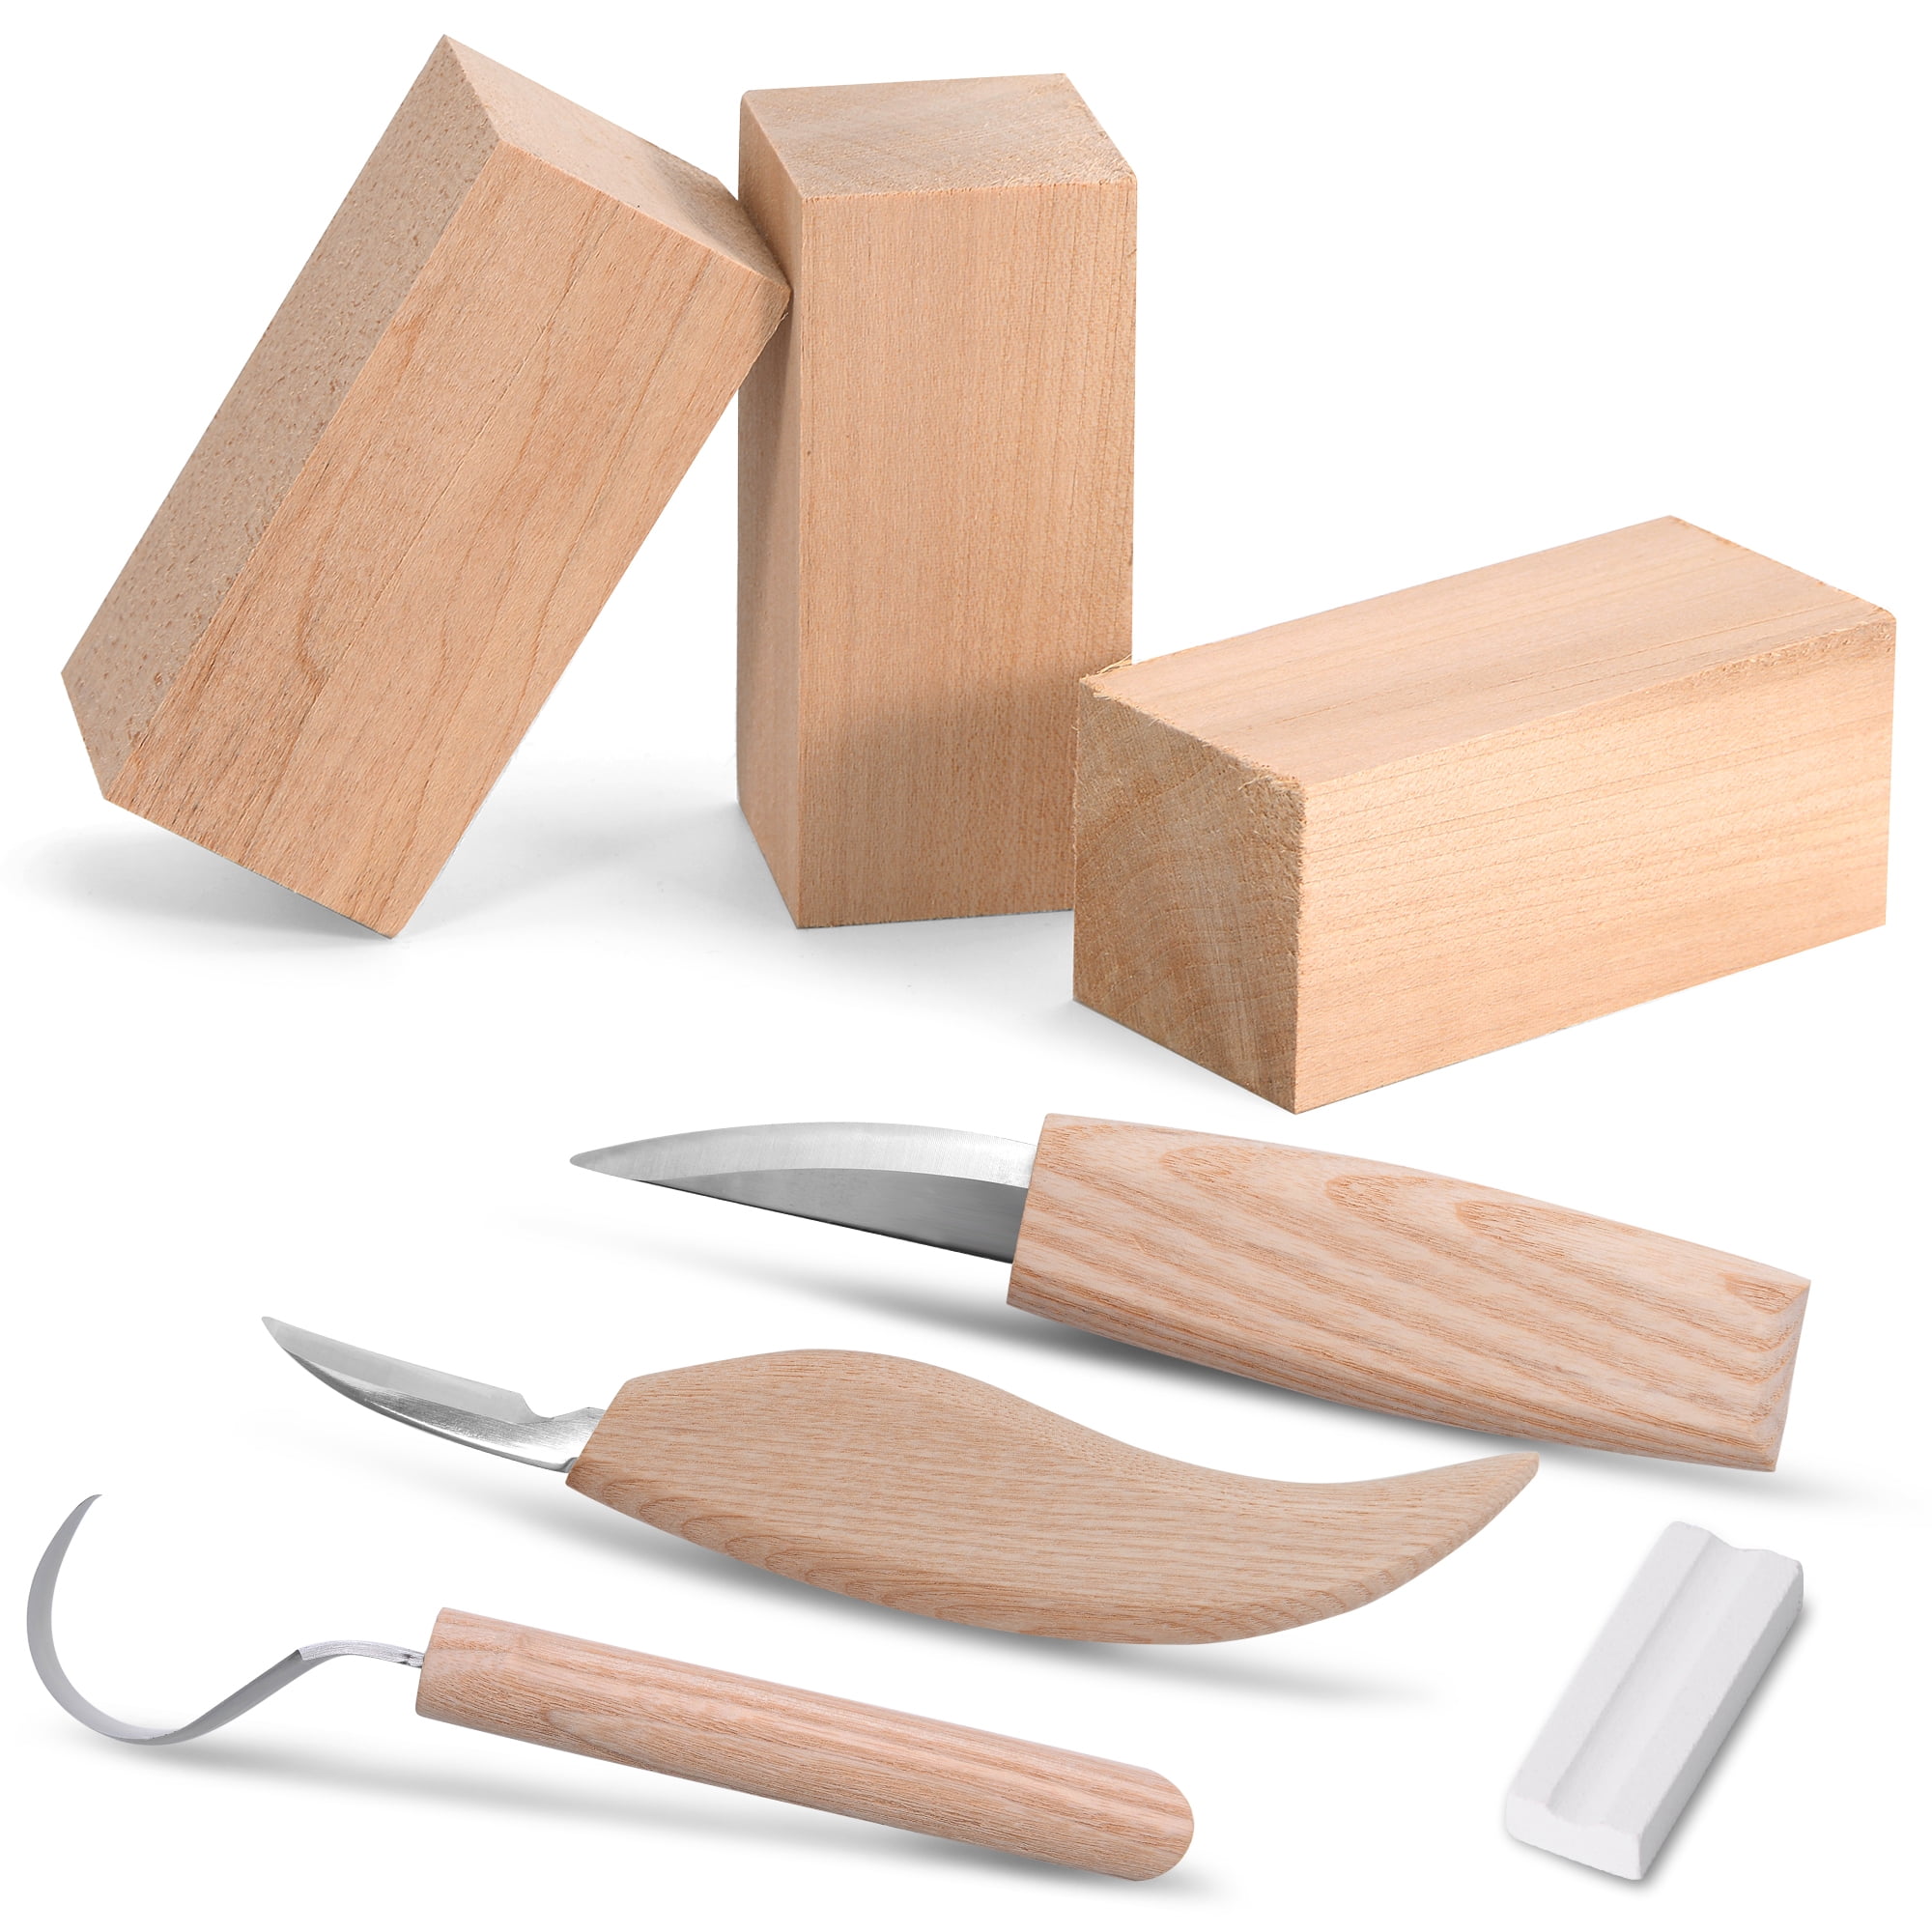 Complete Wood Carving Tools Kit Knife Whittling Woodworking Set Includes 3 Basswood Carving Blocks Knife Detail Wood Knife Whittling Knife Walmart Com Walmart Com